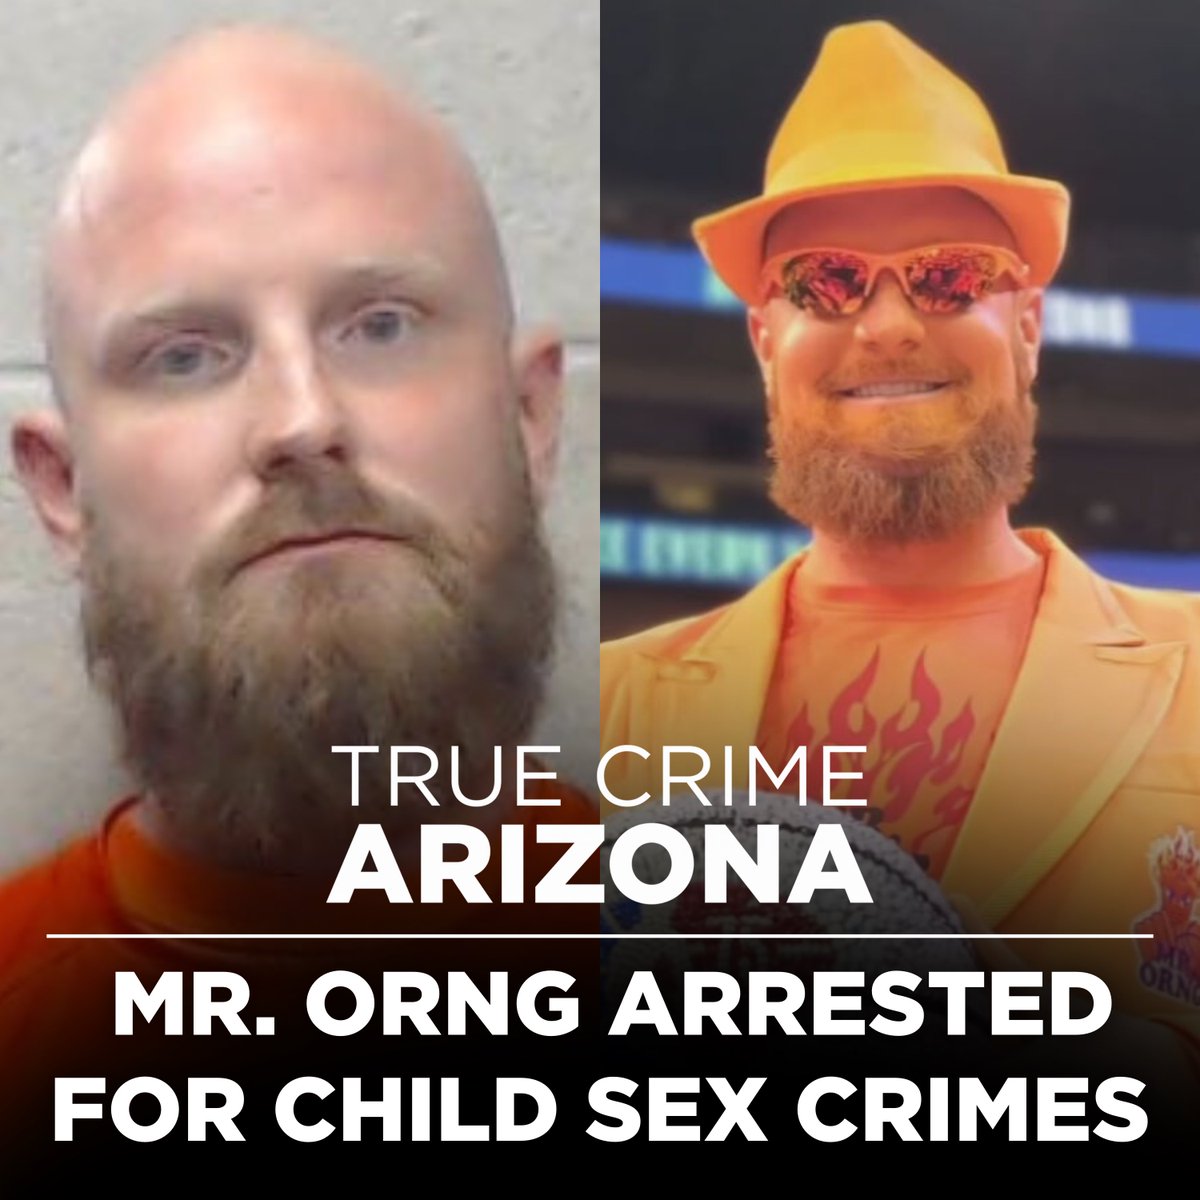 🚨𝐍𝐄𝐖 𝐏𝐎𝐃𝐂𝐀𝐒𝐓 𝐄𝐏𝐈𝐒𝐎𝐃𝐄🚨 Beloved Suns superfan “Mr. ORNG” was arrested for child sex crimes with teen boys at the school he coached basketball at. We go through all the graphic messages and details not shared on TV that led to his shocking arrest. Apple:…